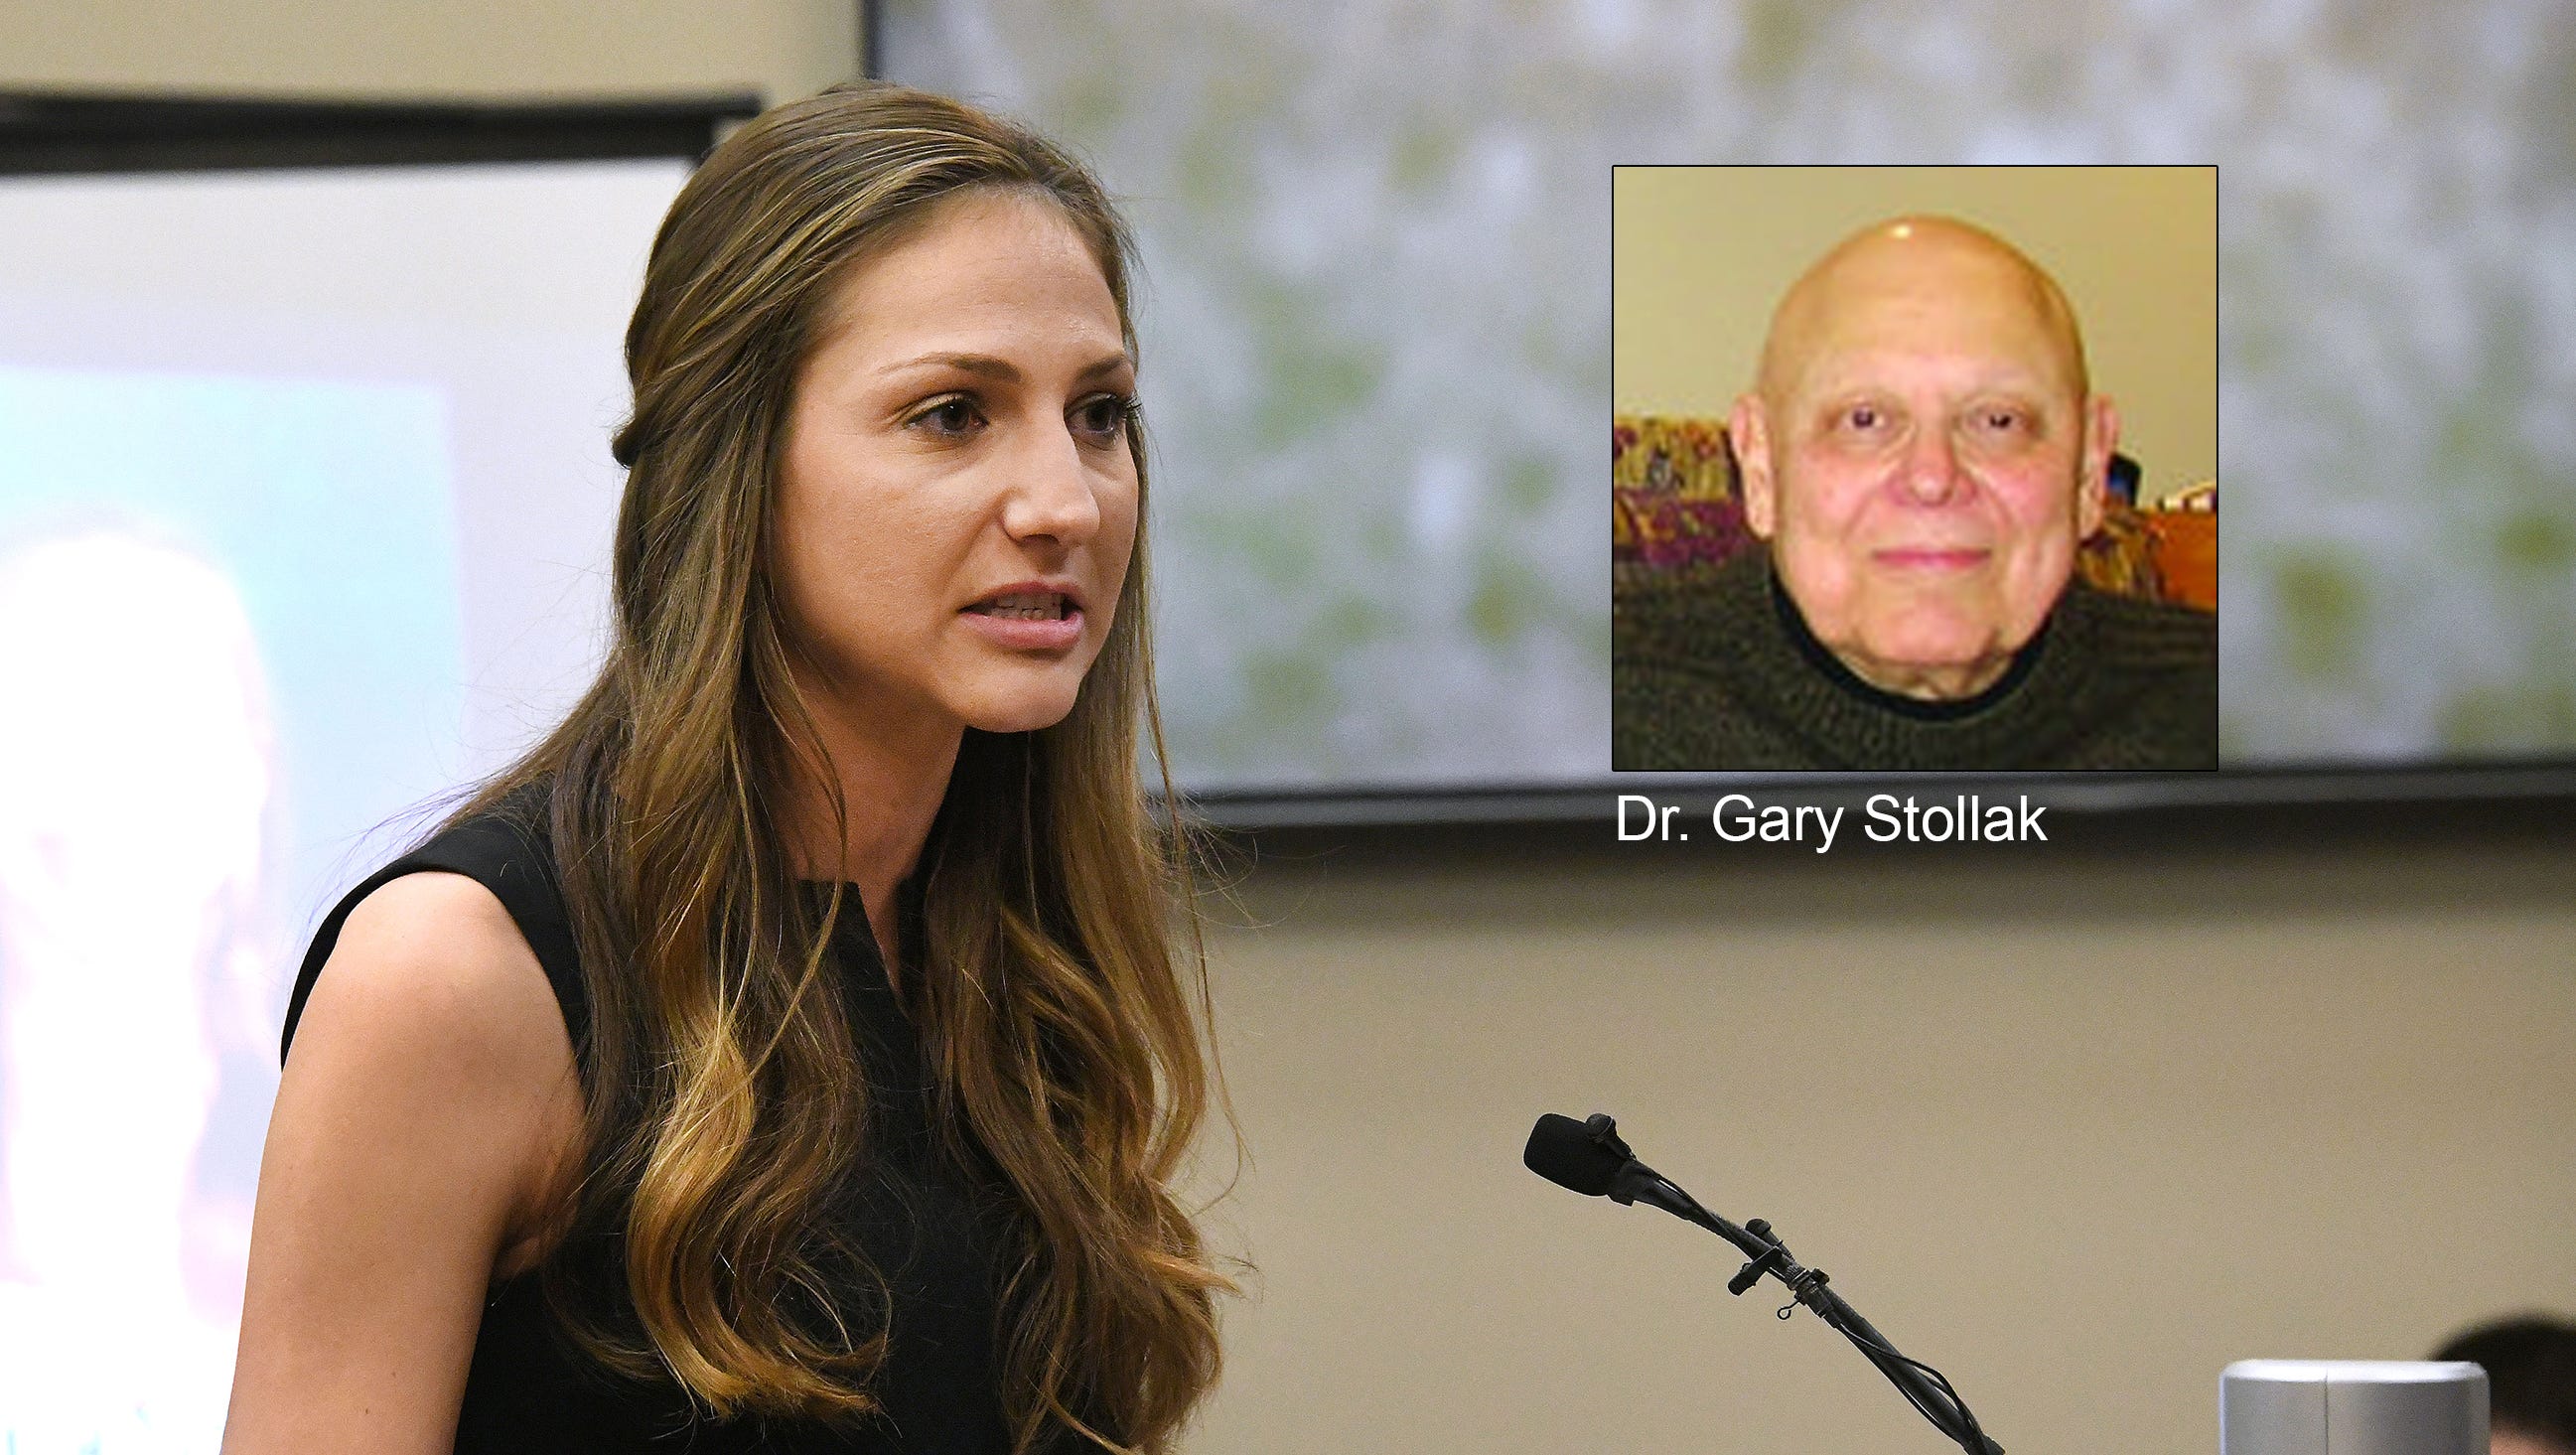 2004: Kyle Stephens tells her parents Nassar molested her over seven years. They informed Dr. Gary Stollak, an MSU clinical psychologist, Stephens says.